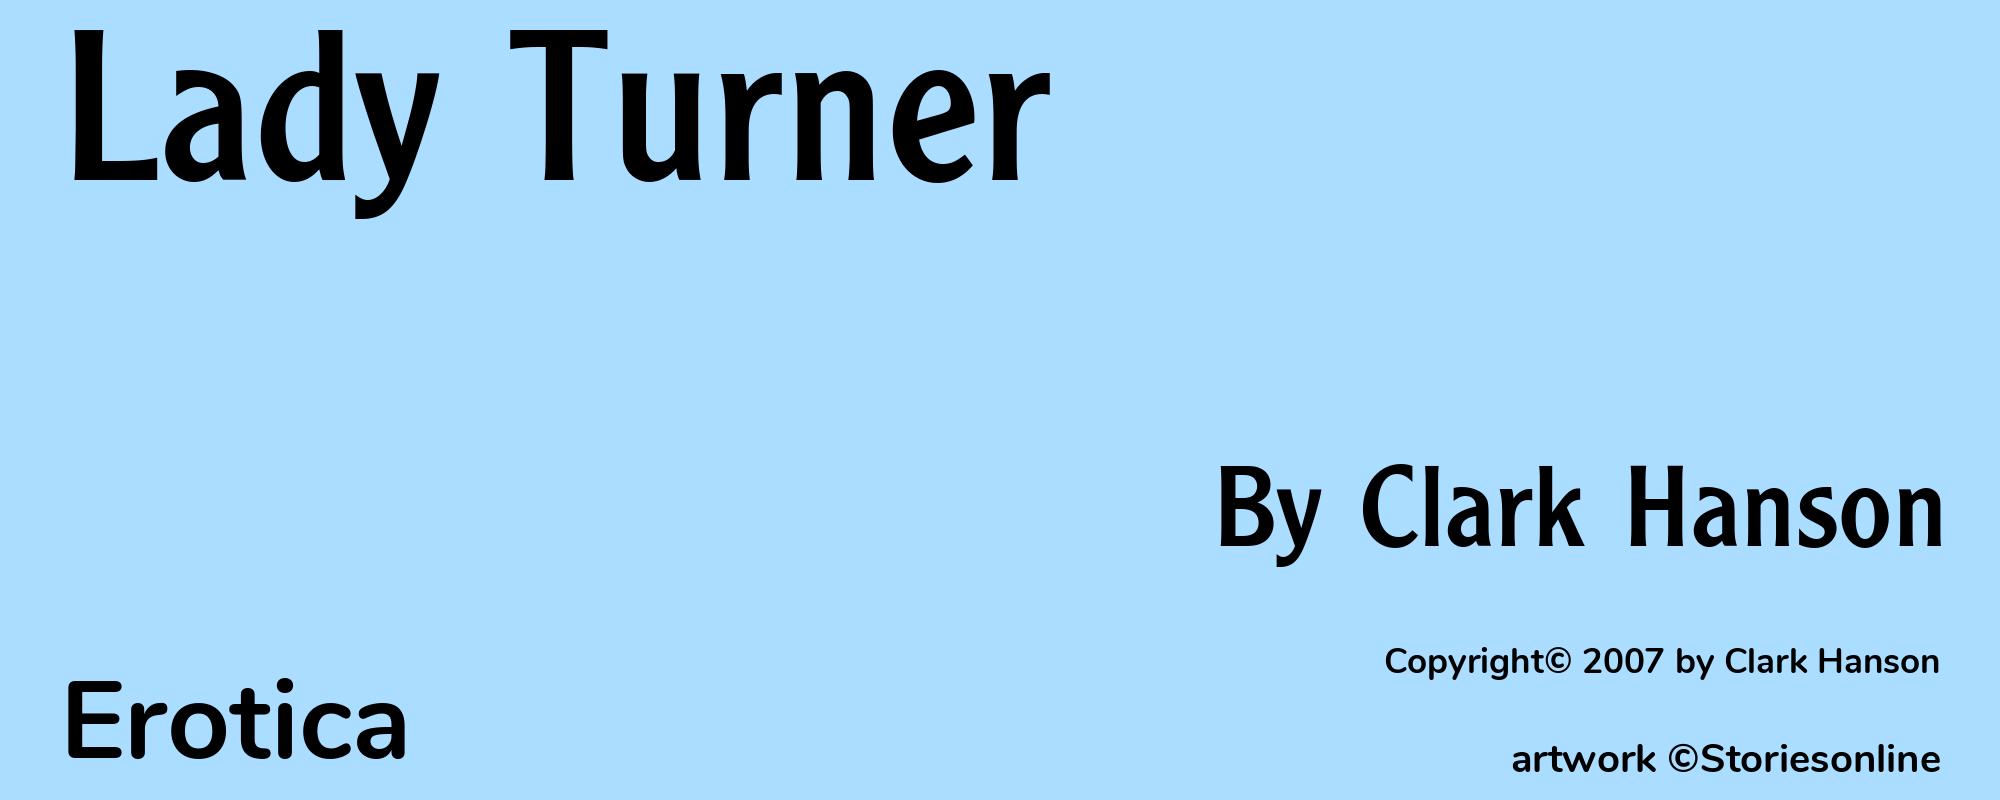 Lady Turner - Cover